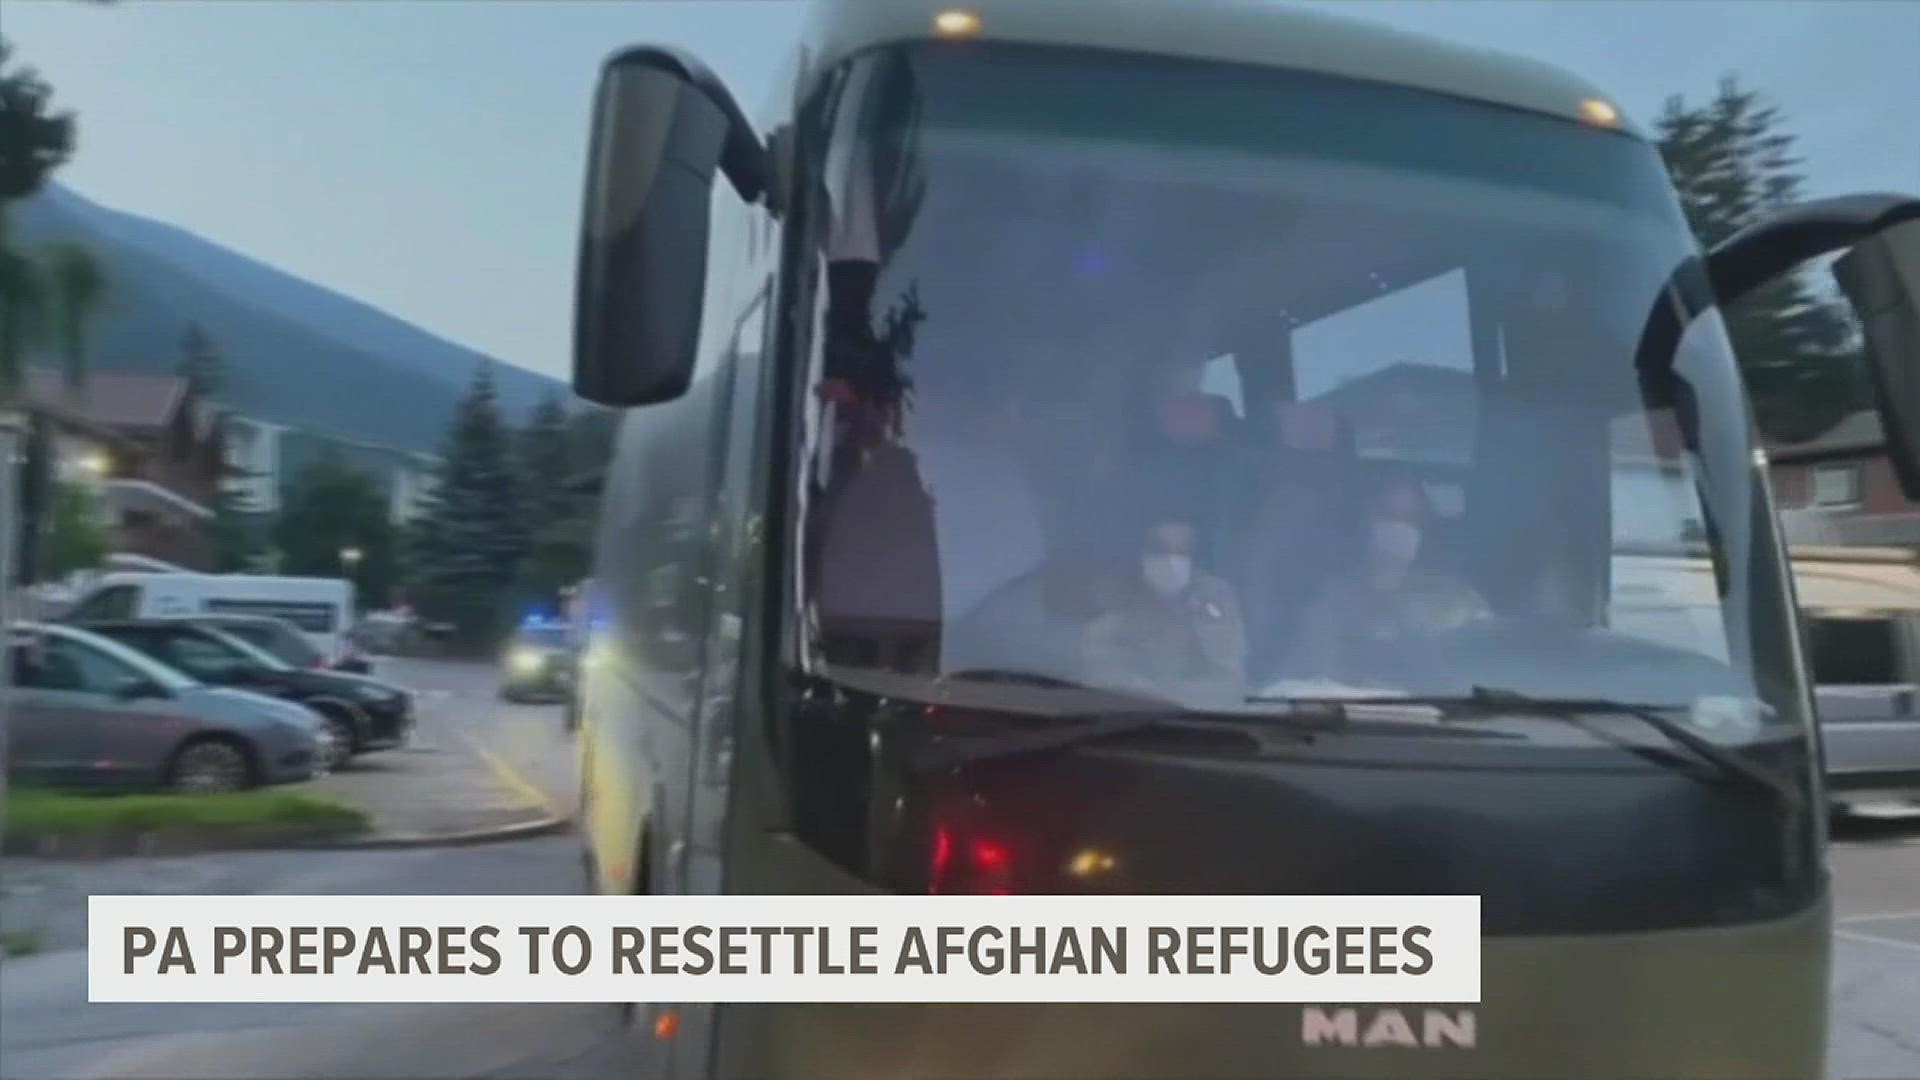 As chaos continues at the Kabul airport and thousands try to flee Afghanistan, Central Pa. organizations are preparing to help resettle some of the refugees.